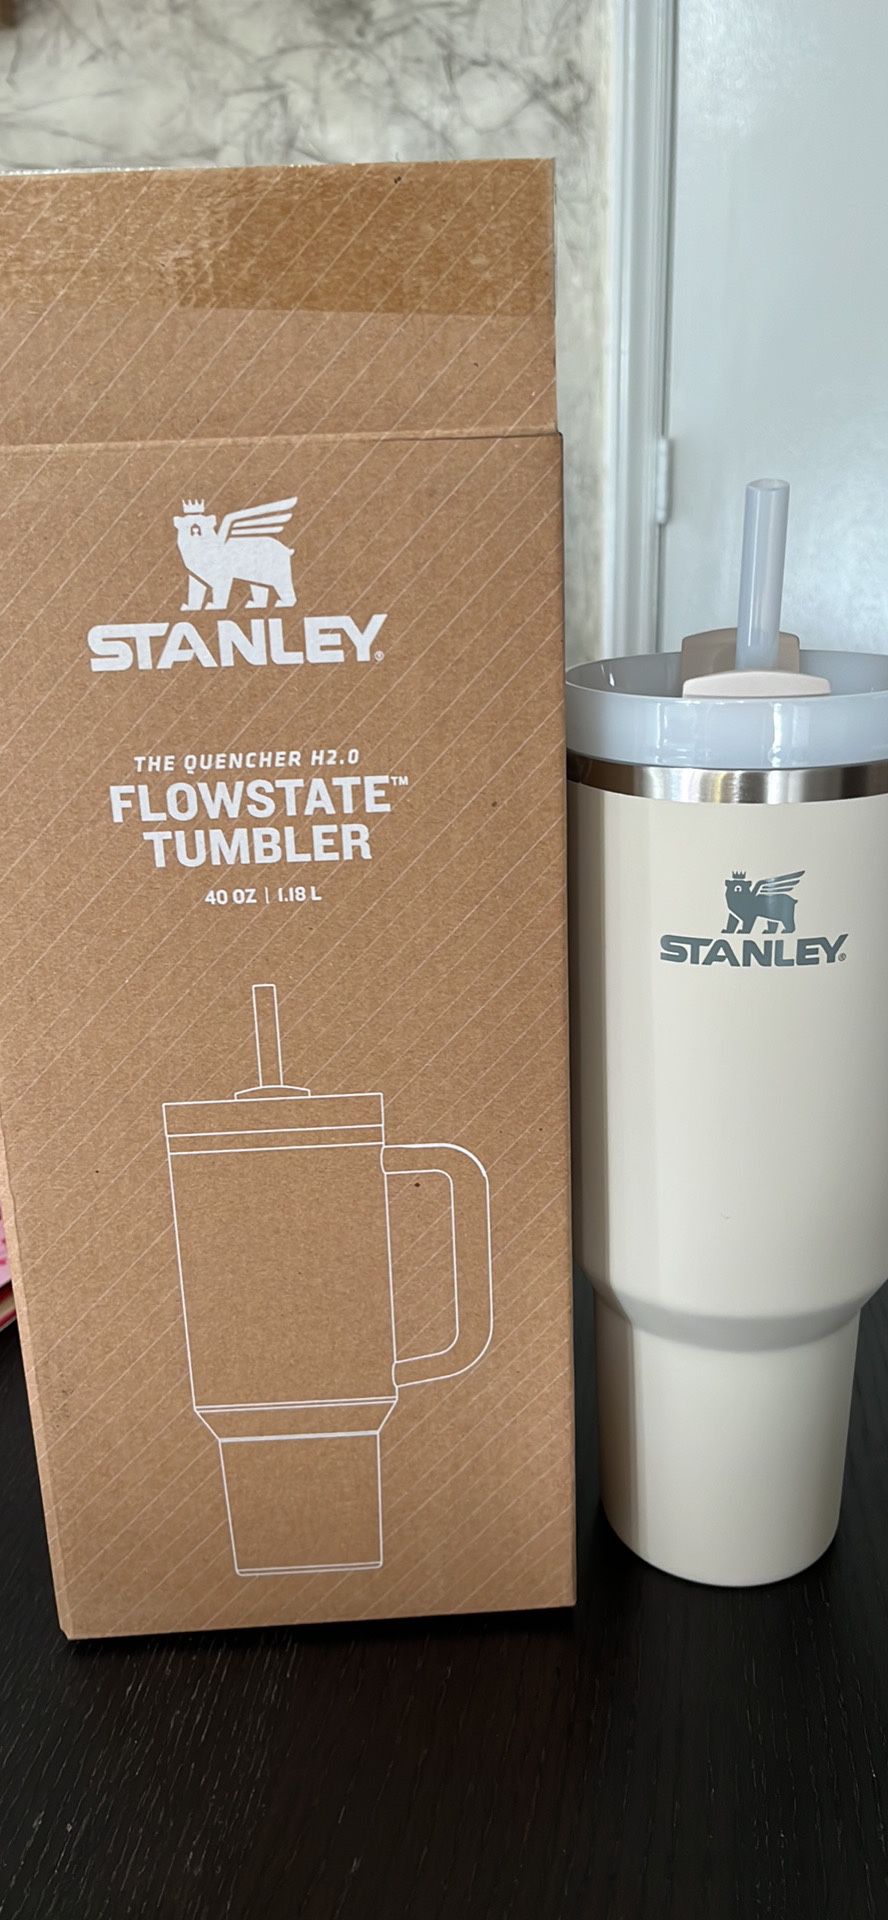 STANLEY 40 oz The Quencher H2.0 FlowState Tumbler DUNE Soft Matte